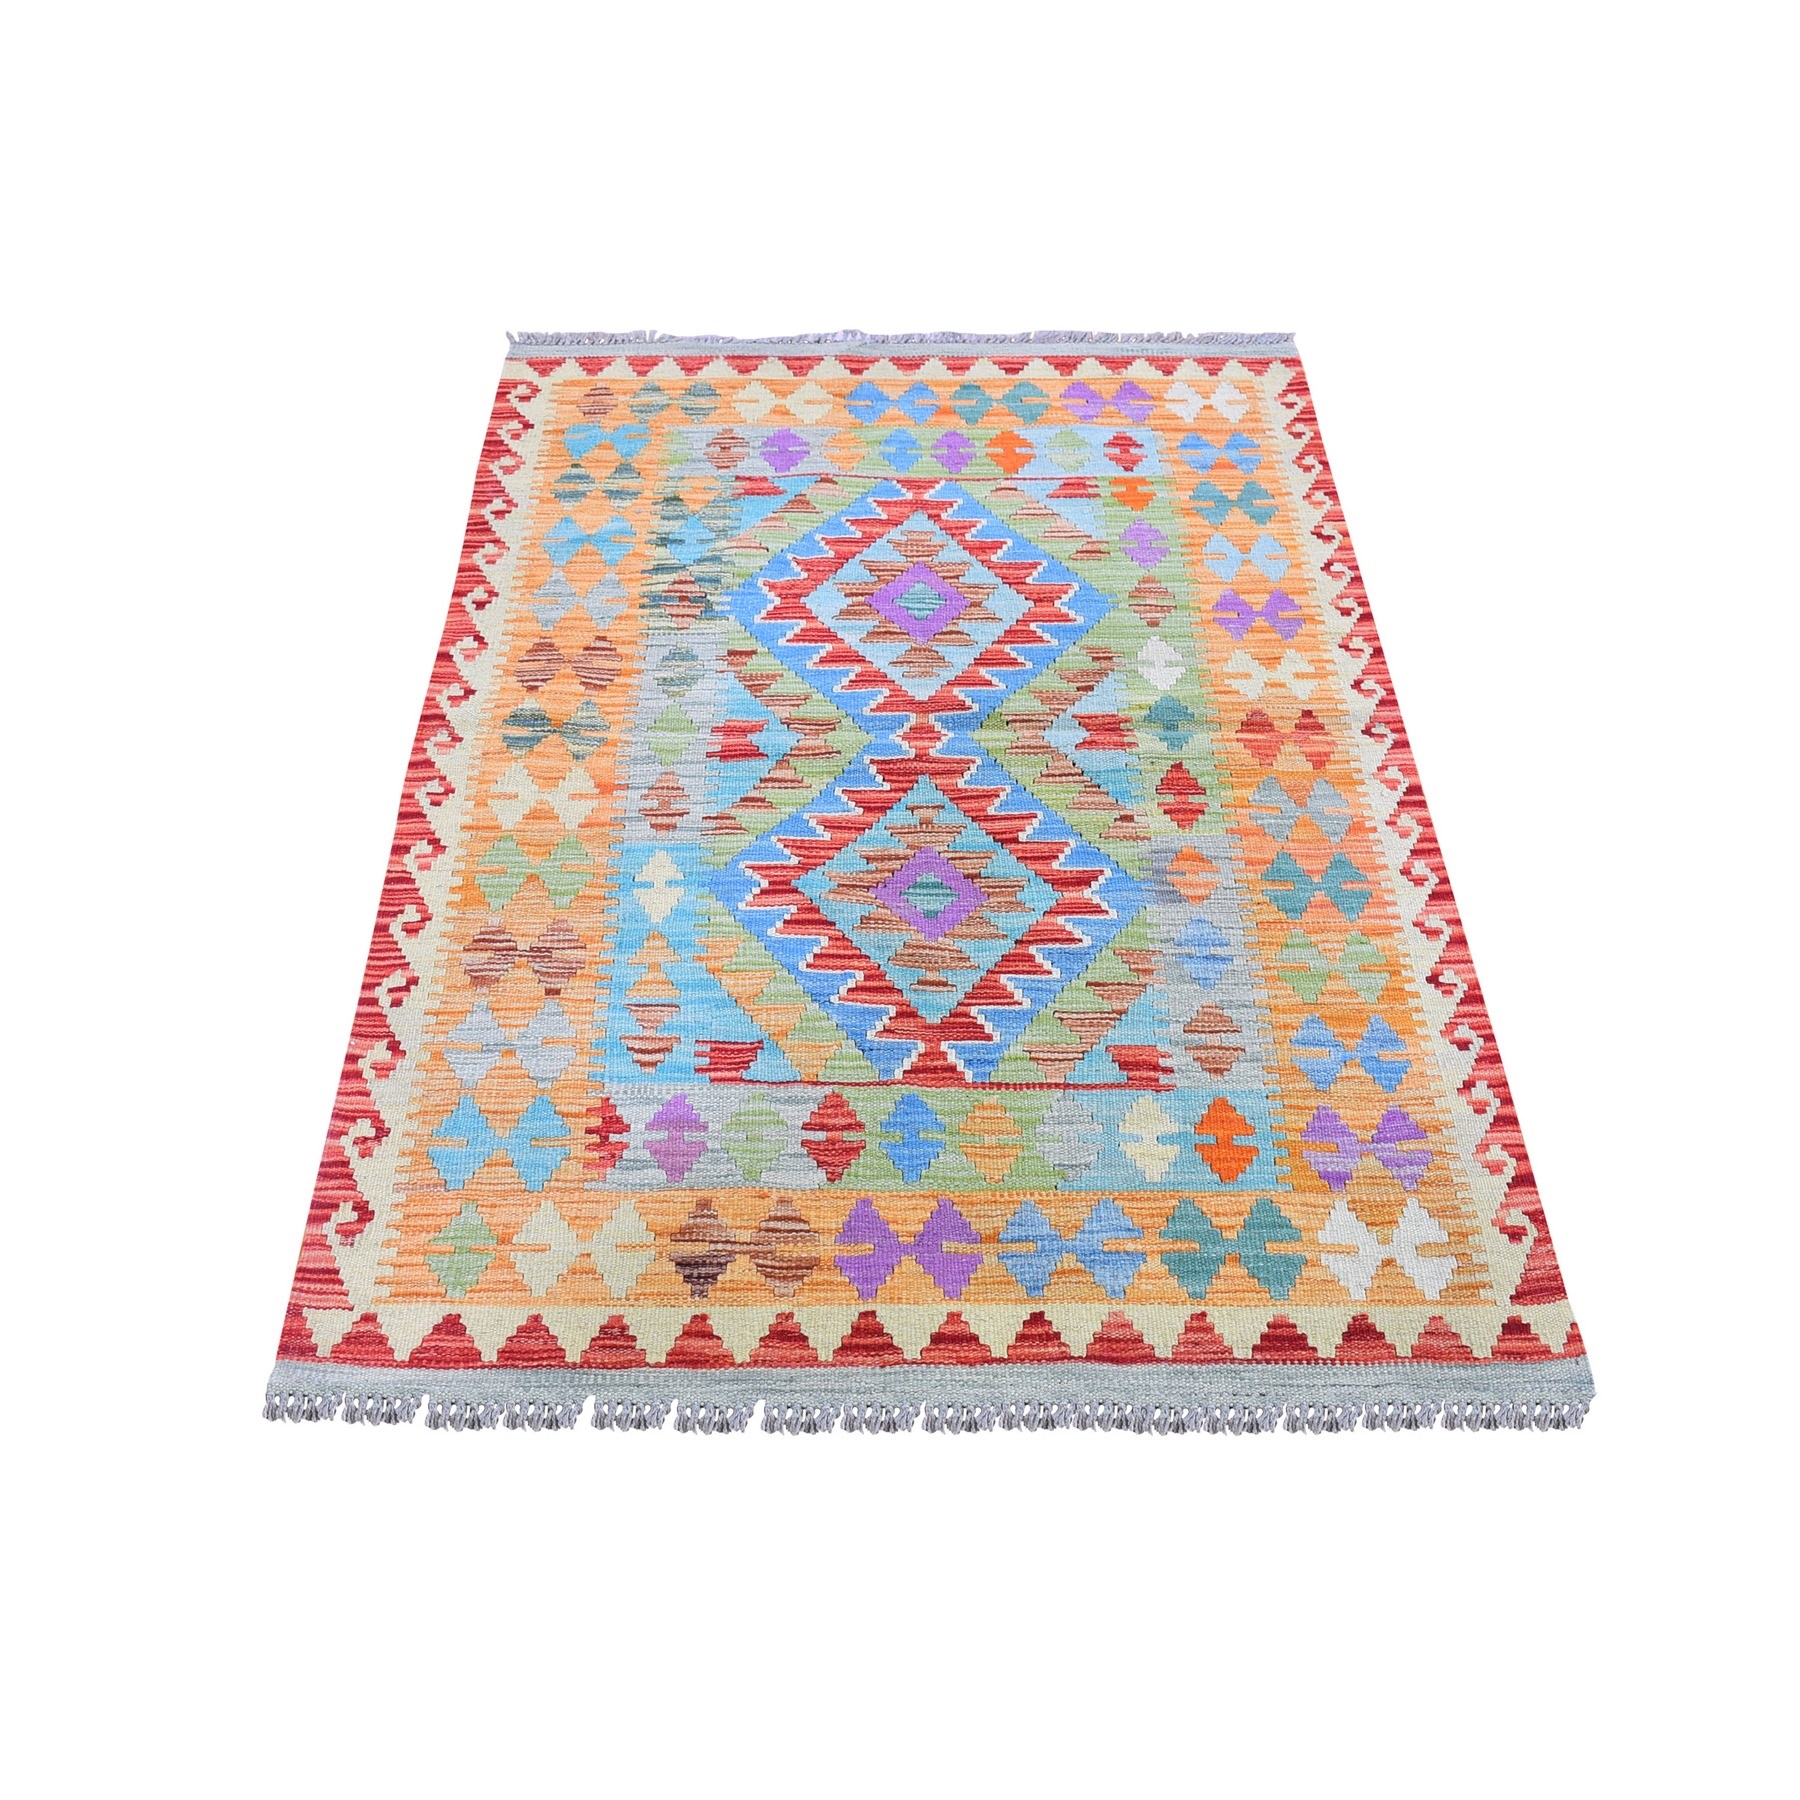 Traditional Wool Hand-Woven Area Rug 3'1